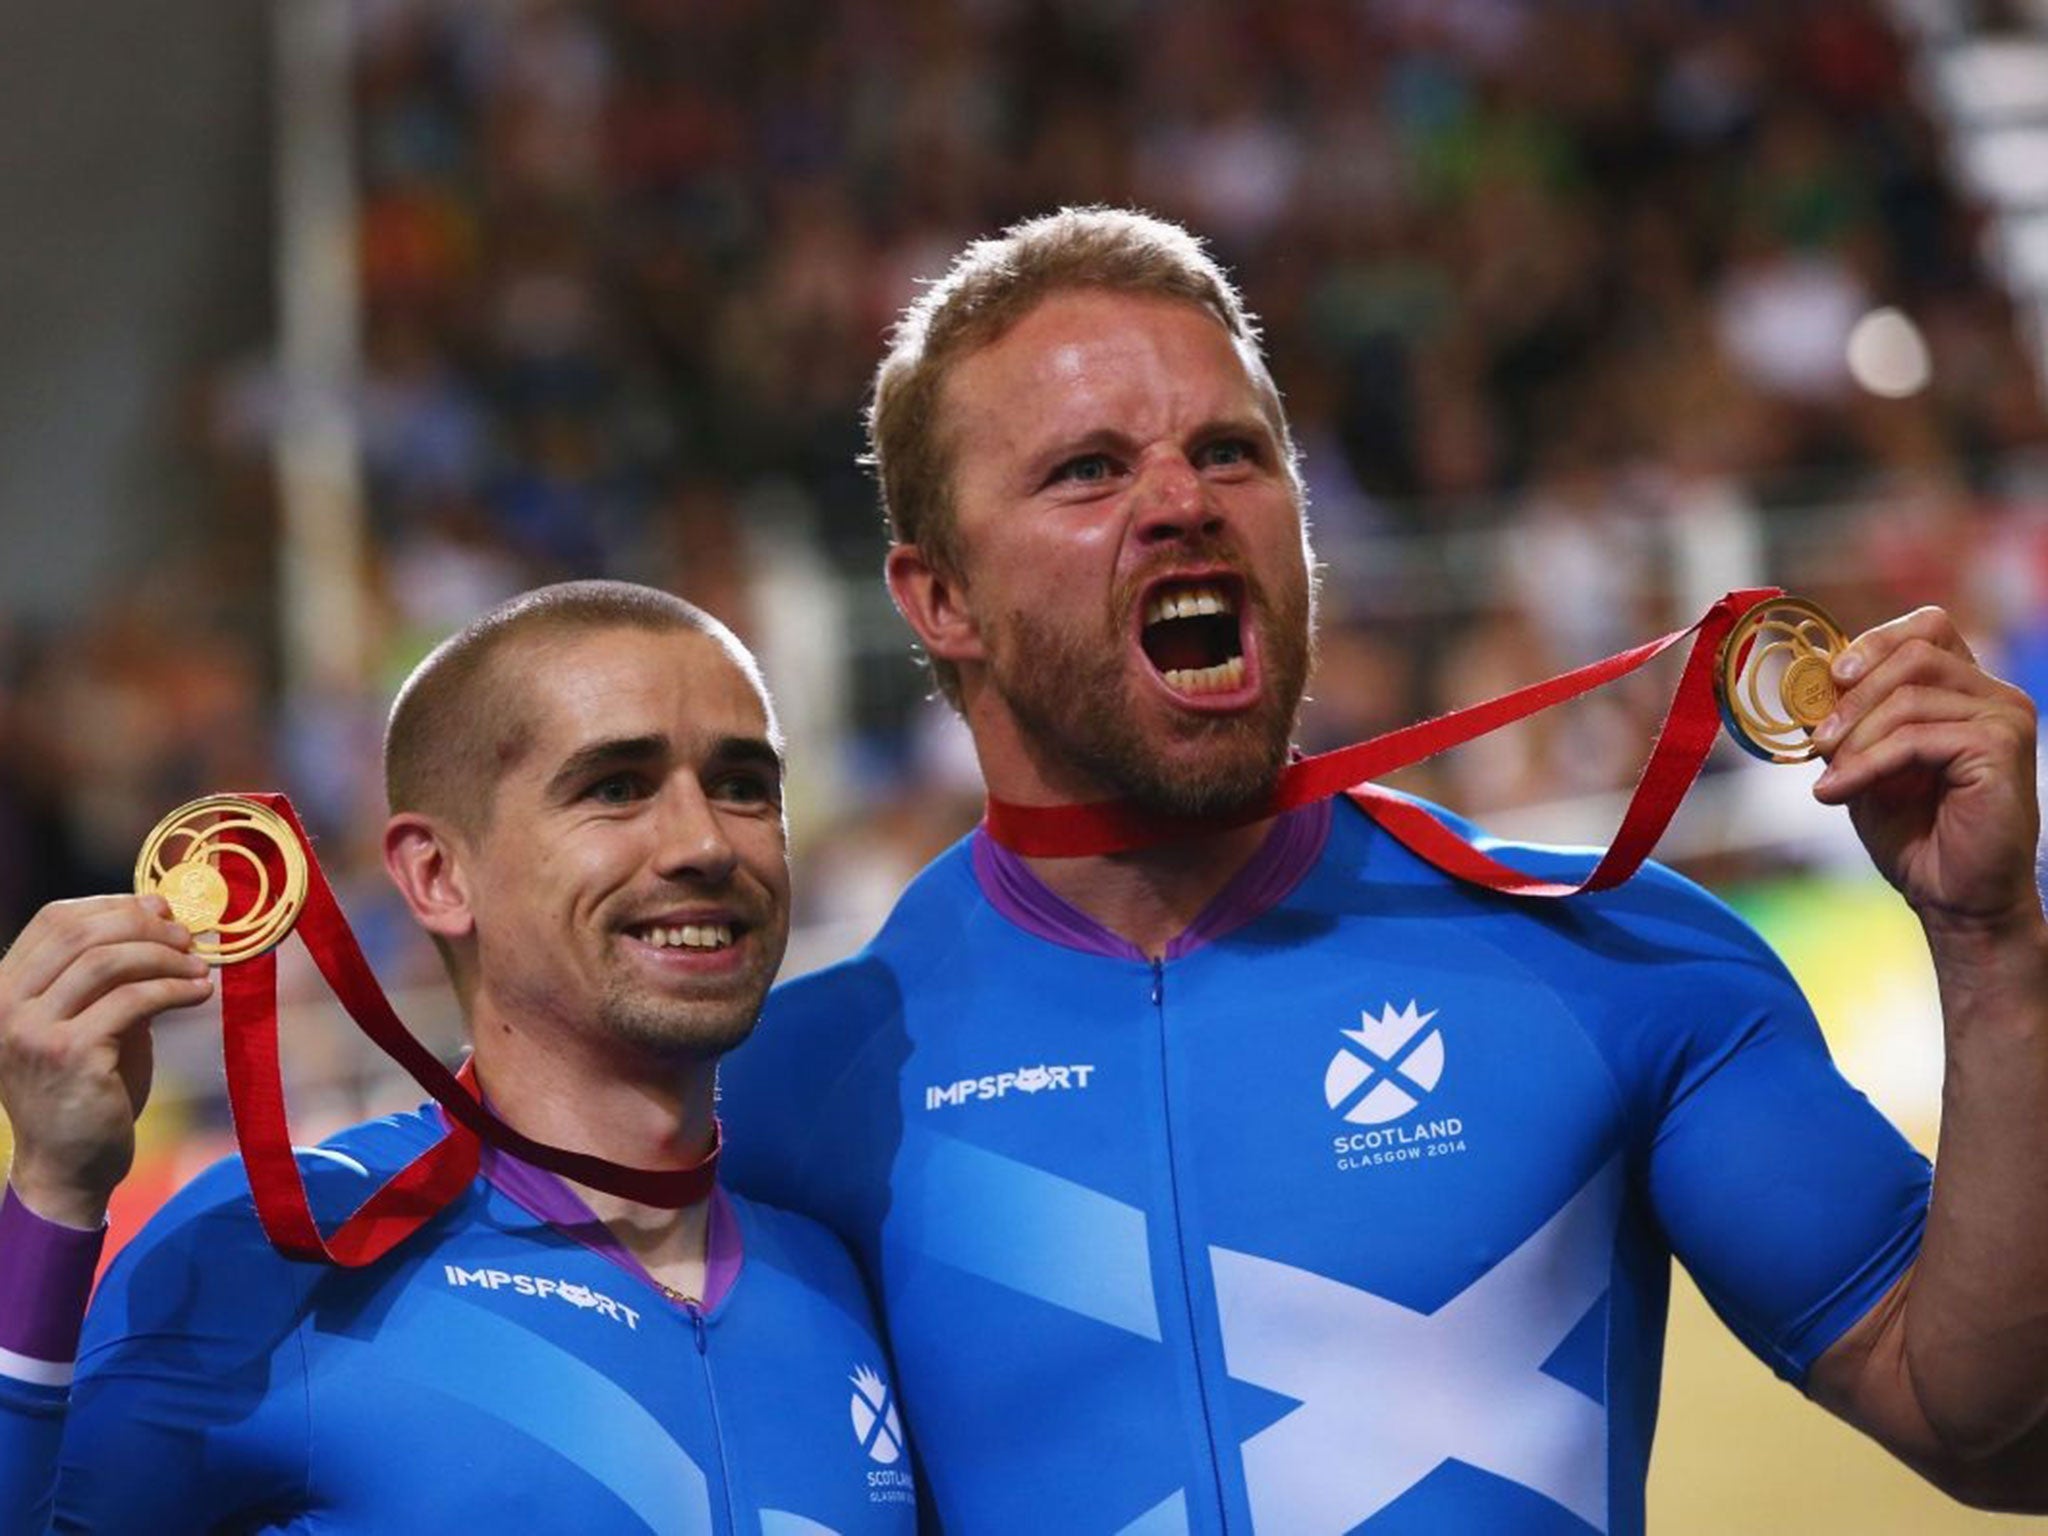 Twice blessed: Neil Fachie (left) and pilot Craig Maclean celebrate victory in the para-cycling sprint tandem, their second Commonwealth triumph in Glasgow